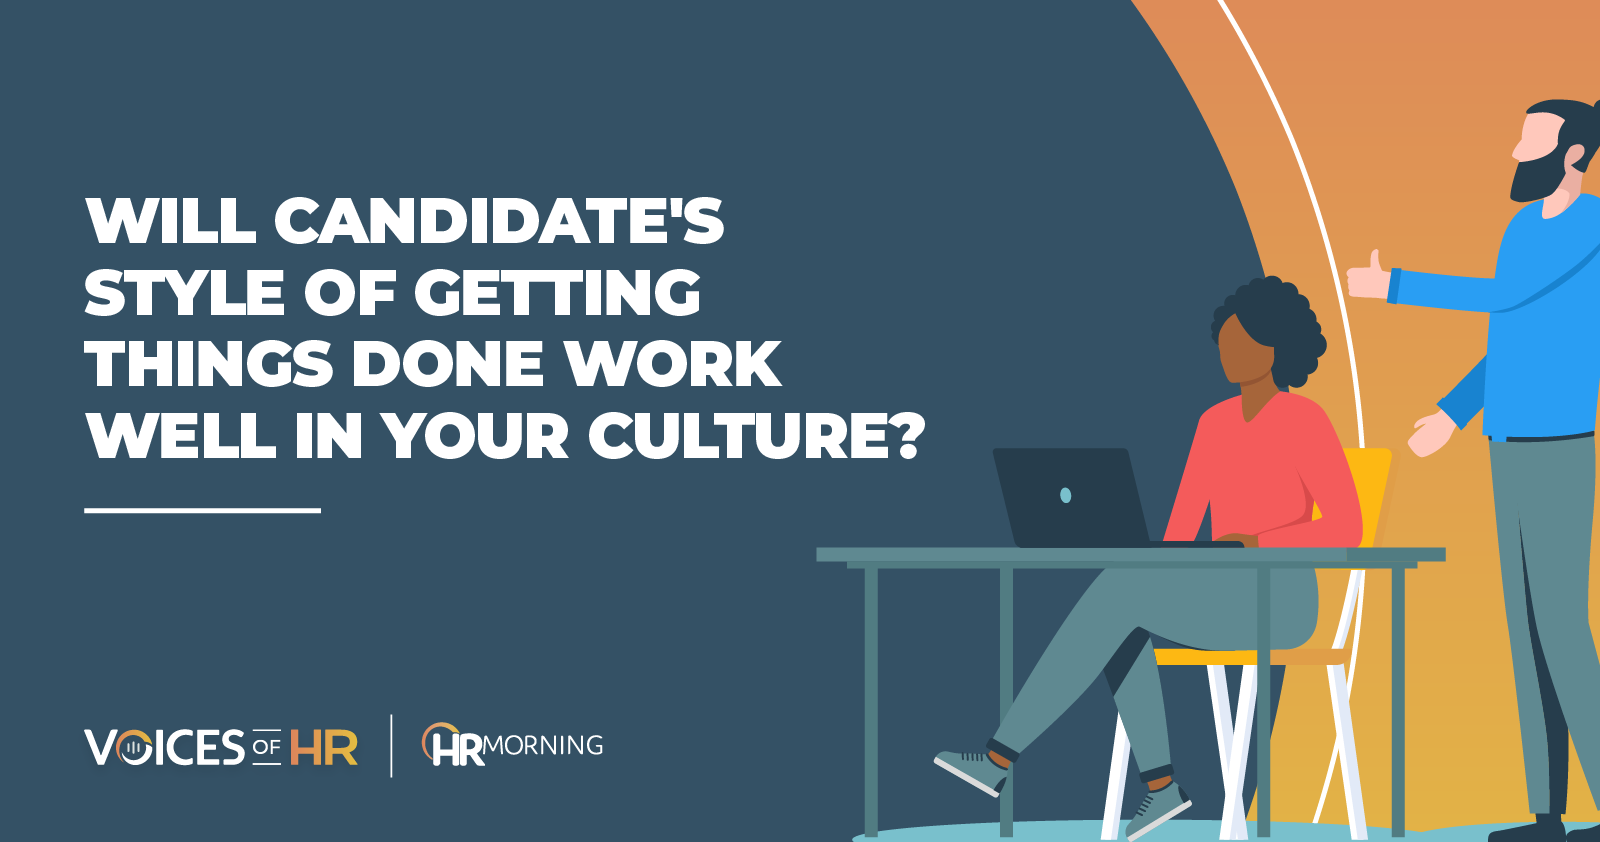 Will candidate's style of getting things done work well in your culture?